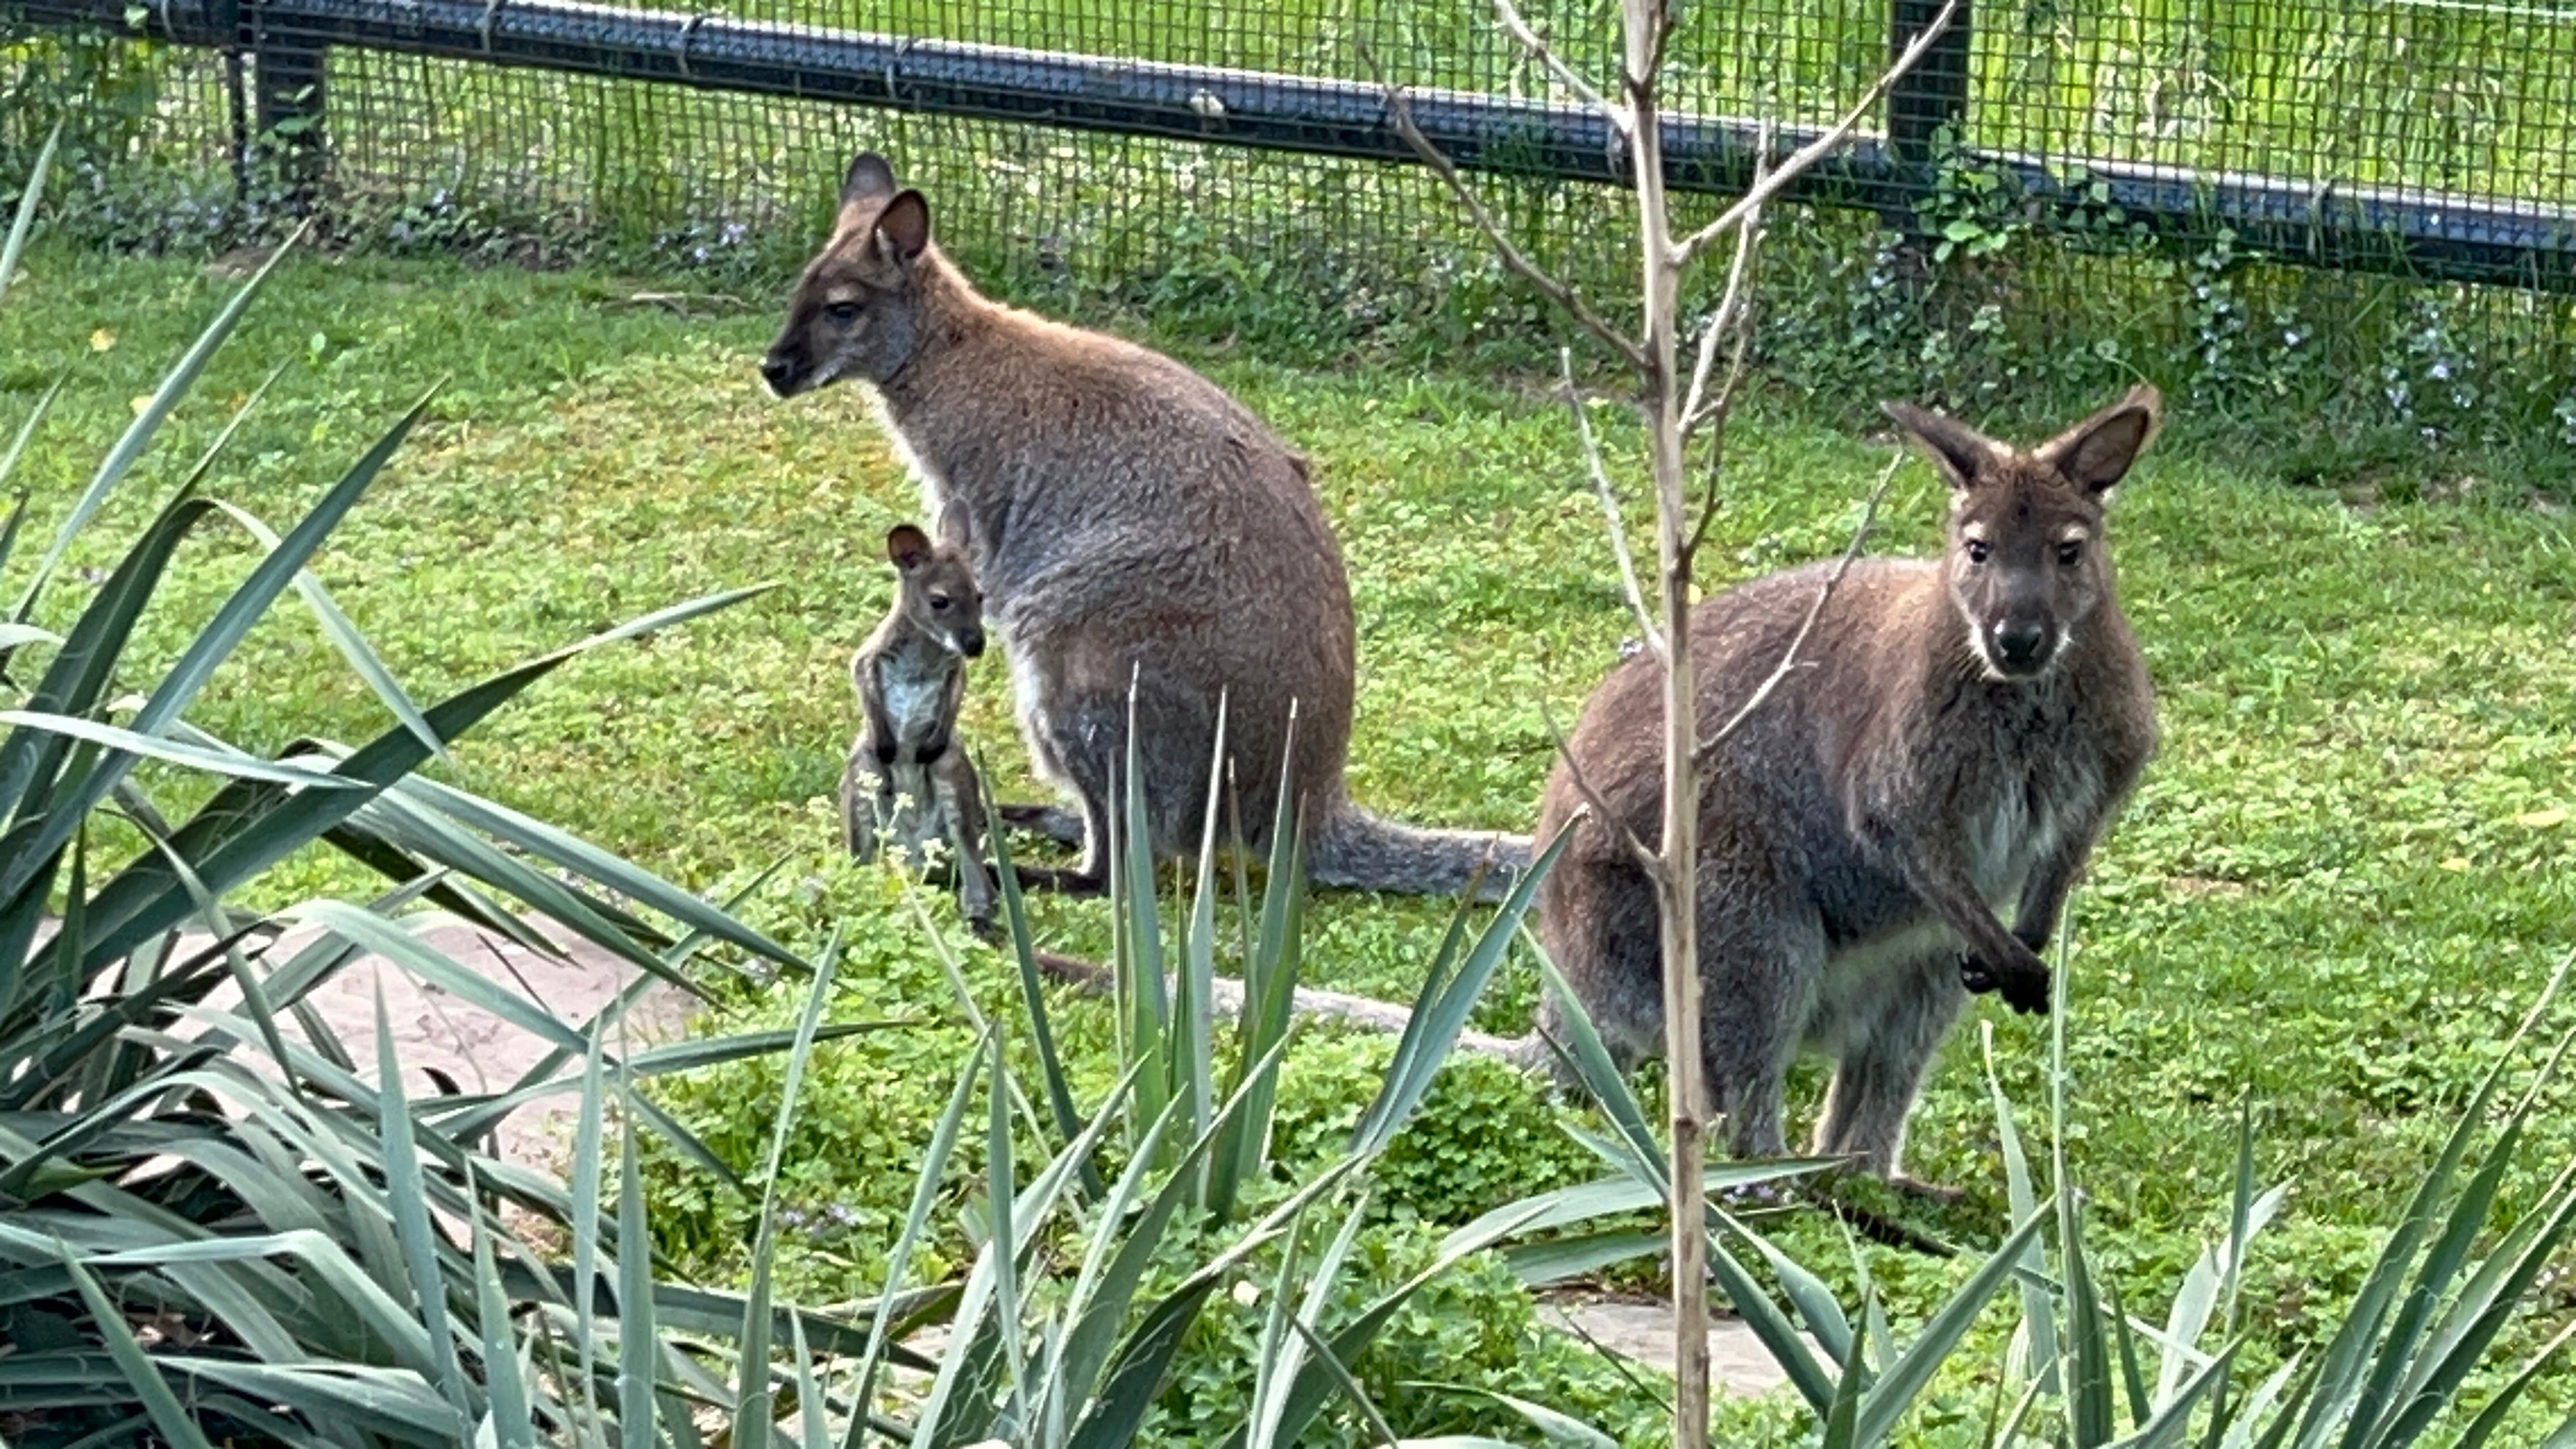 Photo of two adult wallabies and a small baby wallaby together in a grassy yard.